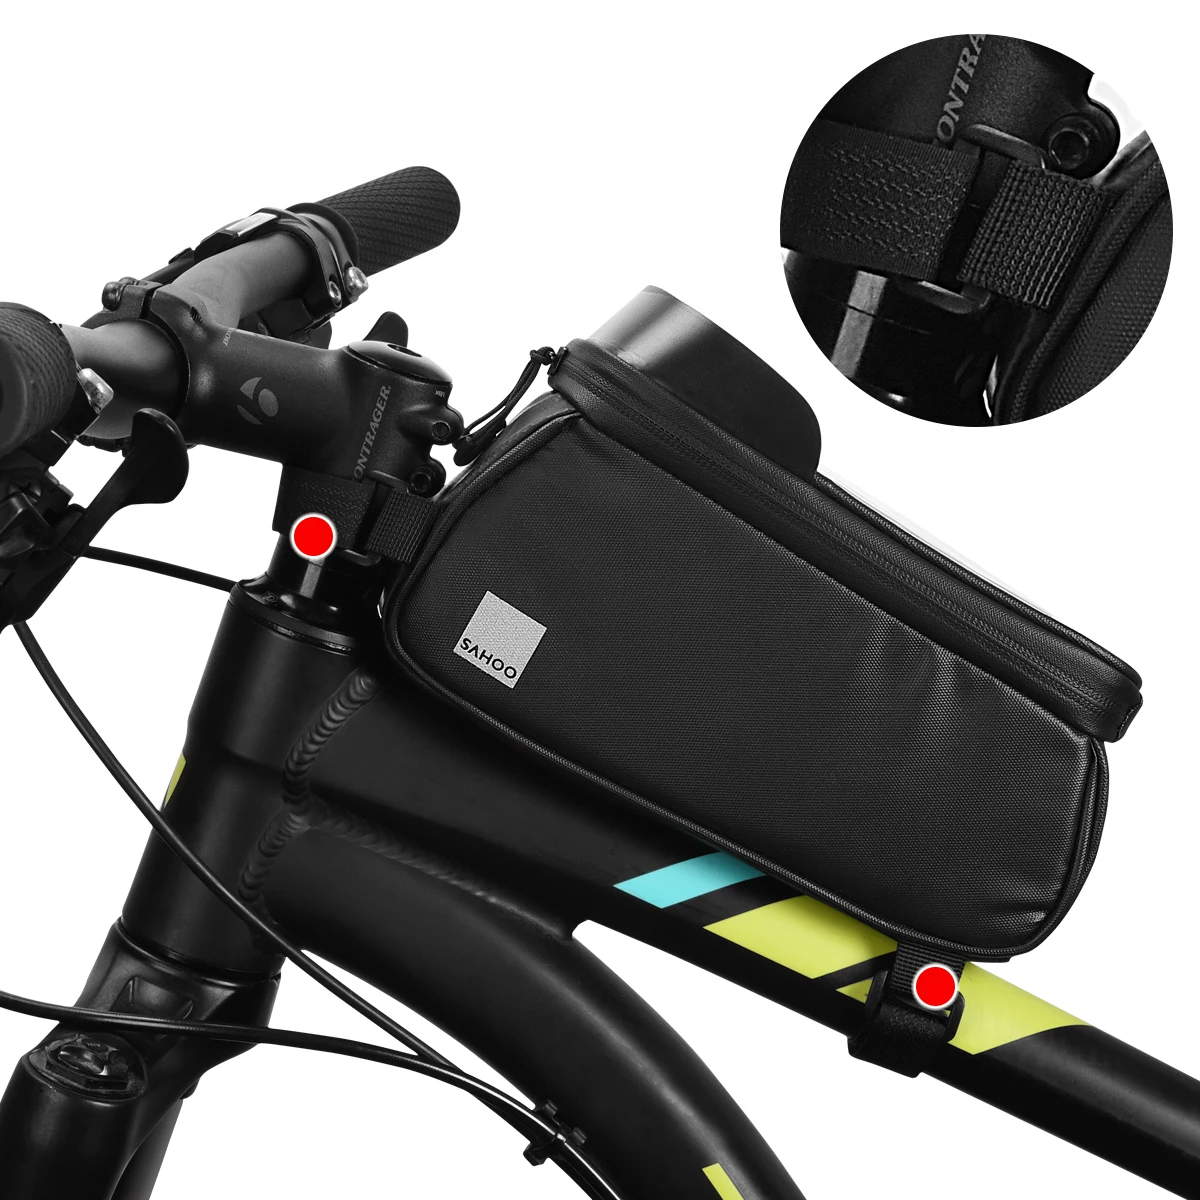 Sale Sahoo 122053 Cycling Bicycle Waterproof Touchscreen Front Frame Top Tube Bike 6.5in Cell Mobile Phone Bag Pannier Pack Holder 3